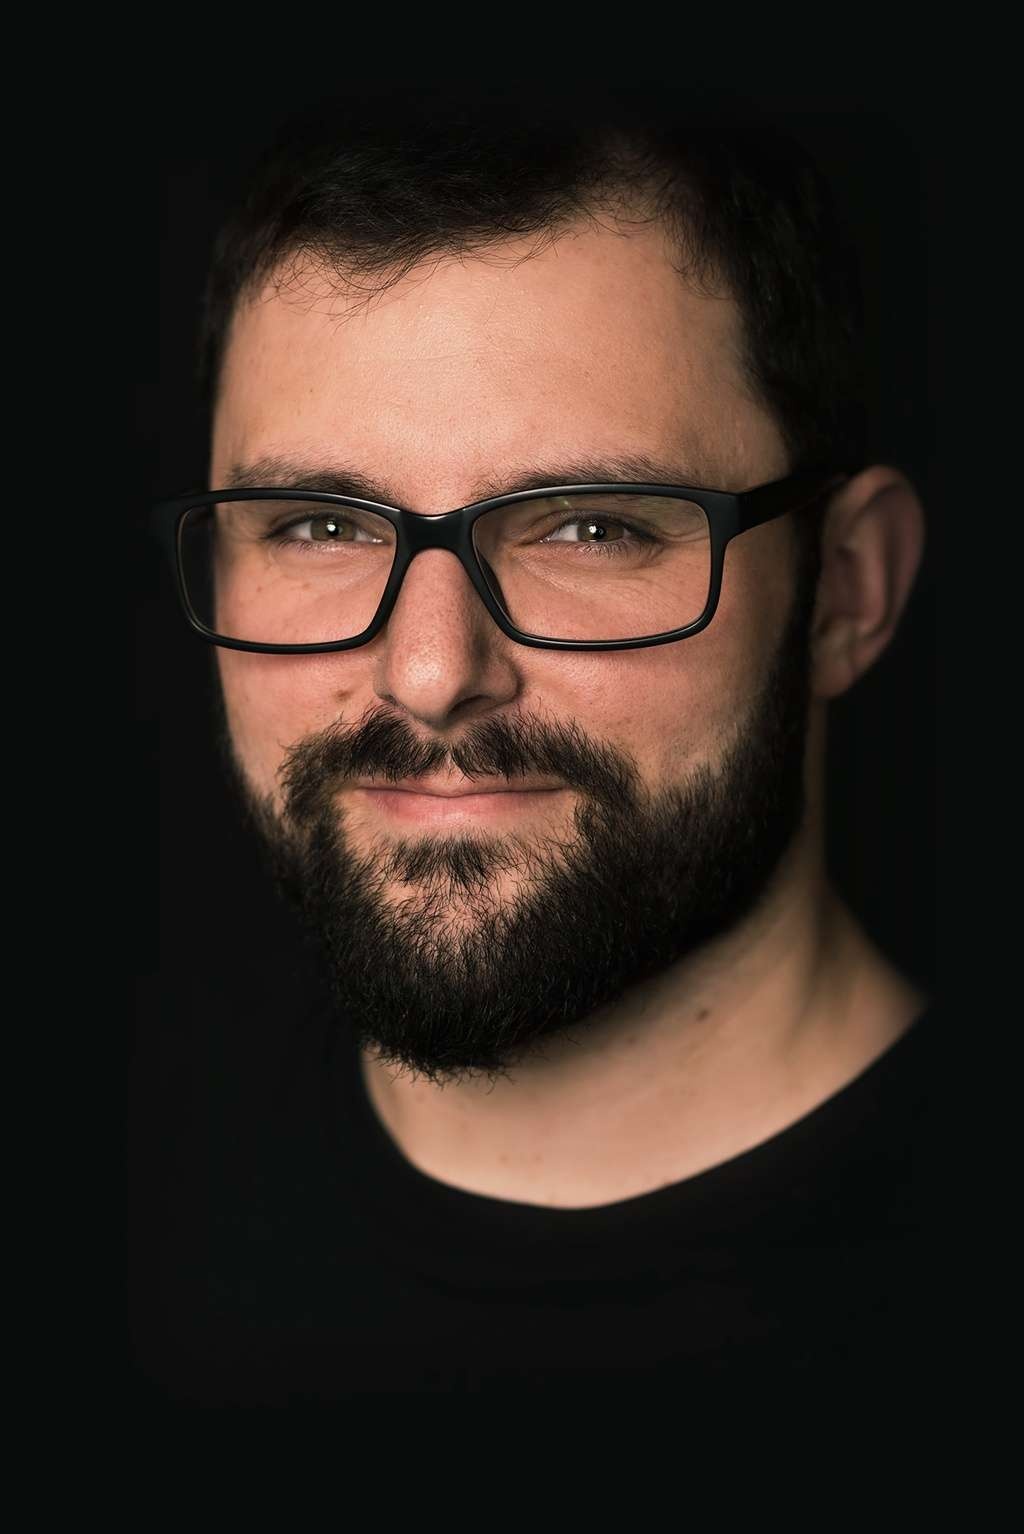 headshot of Matthew Basile wearing glasses and a black shirt photographed on a black background.